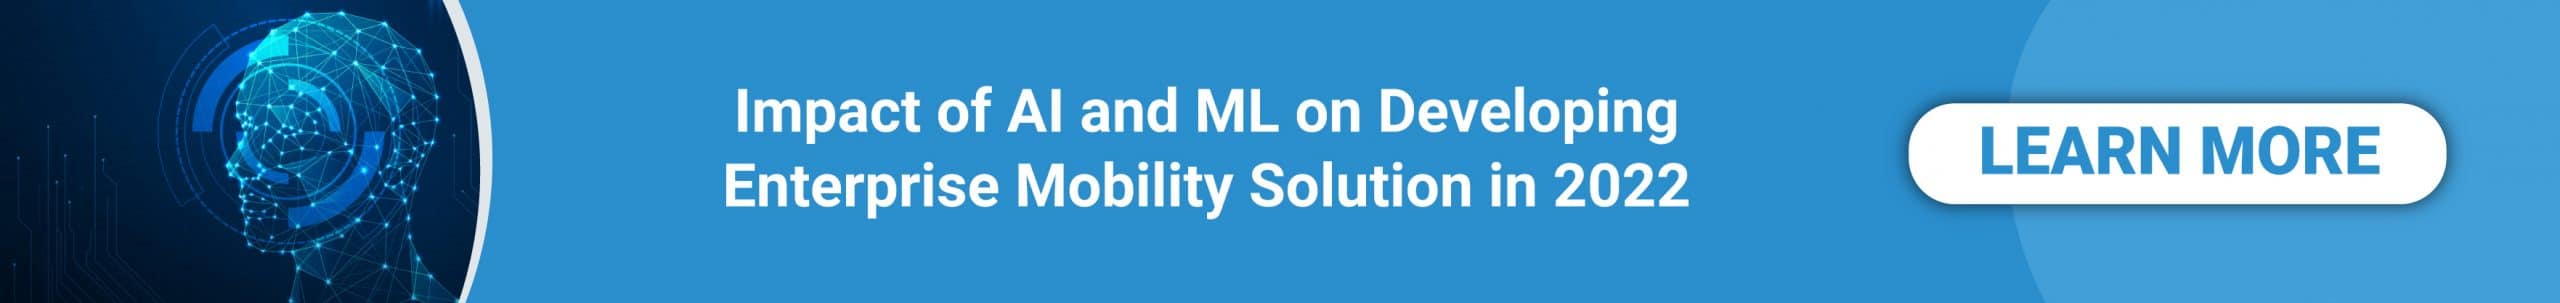 AI and ML on Enterprise Mobility Solution in 2022